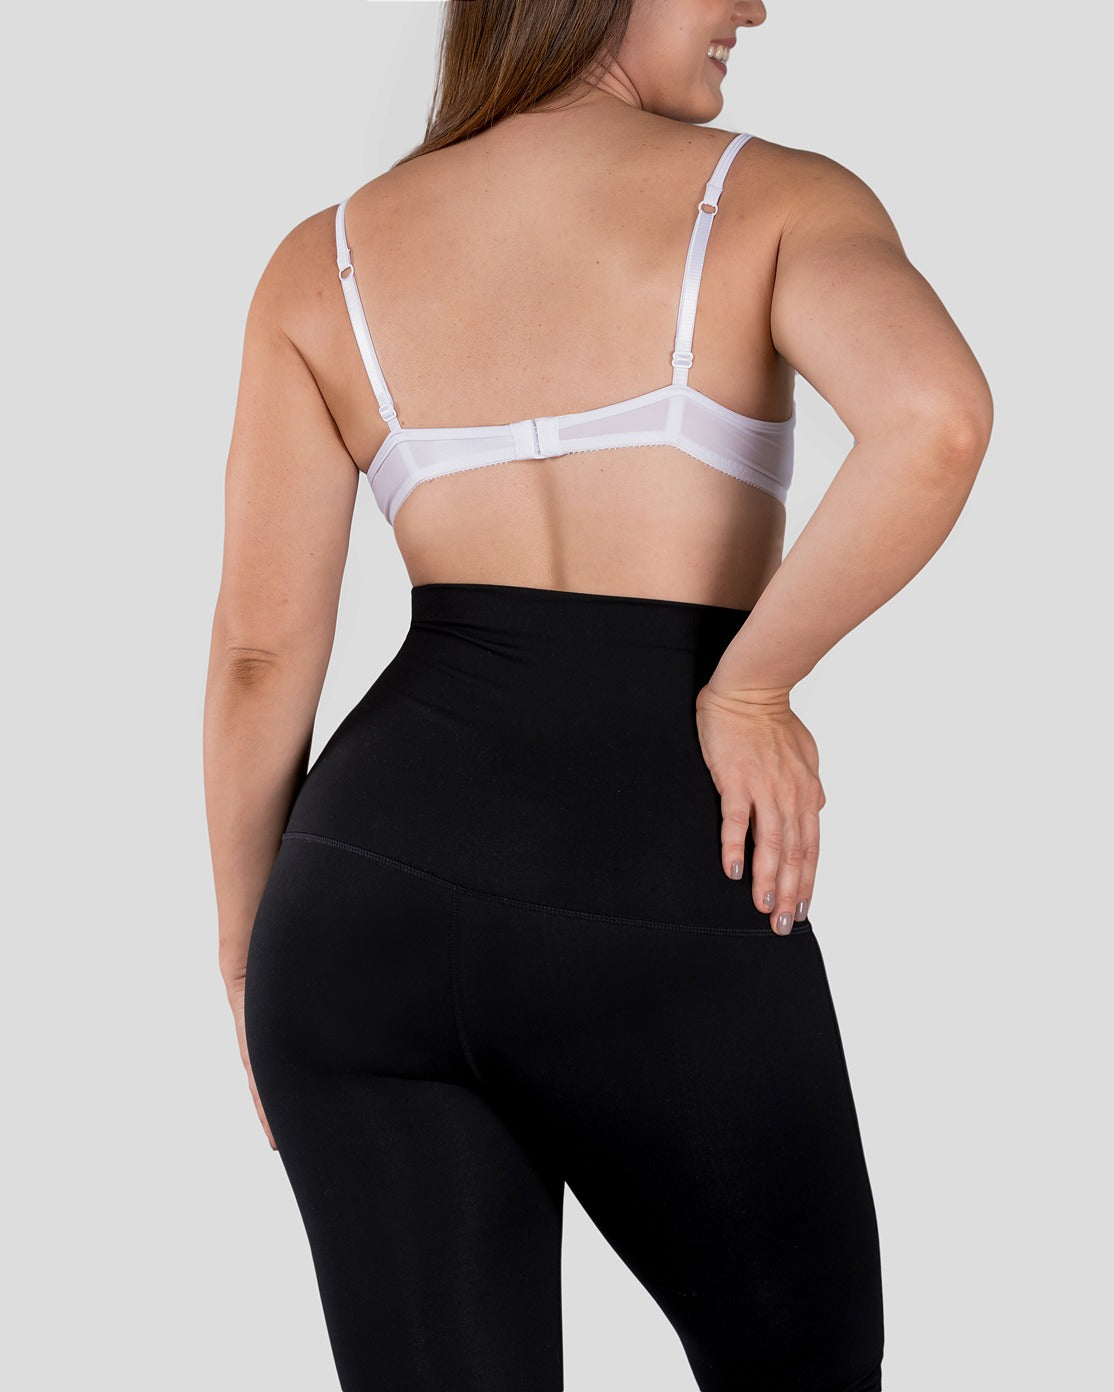 High Waist Women Legging Post Operation Surgery Postpartum Liposuction  Recovery Pants Compression Tights Body Shaper Pantyhose